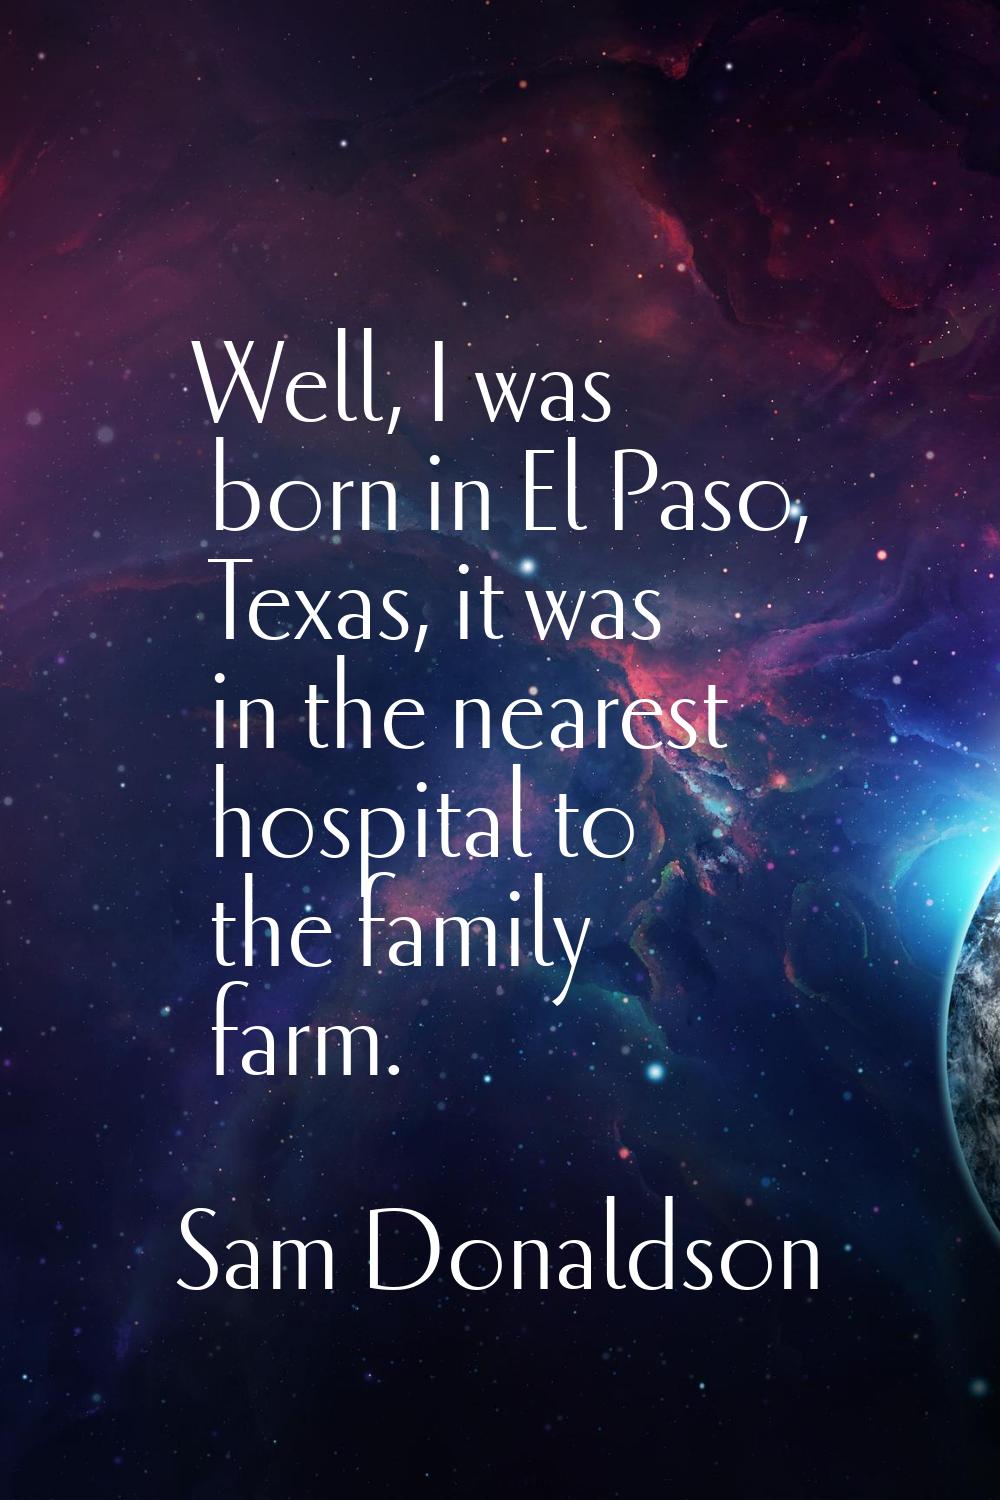 Well, I was born in El Paso, Texas, it was in the nearest hospital to the family farm.